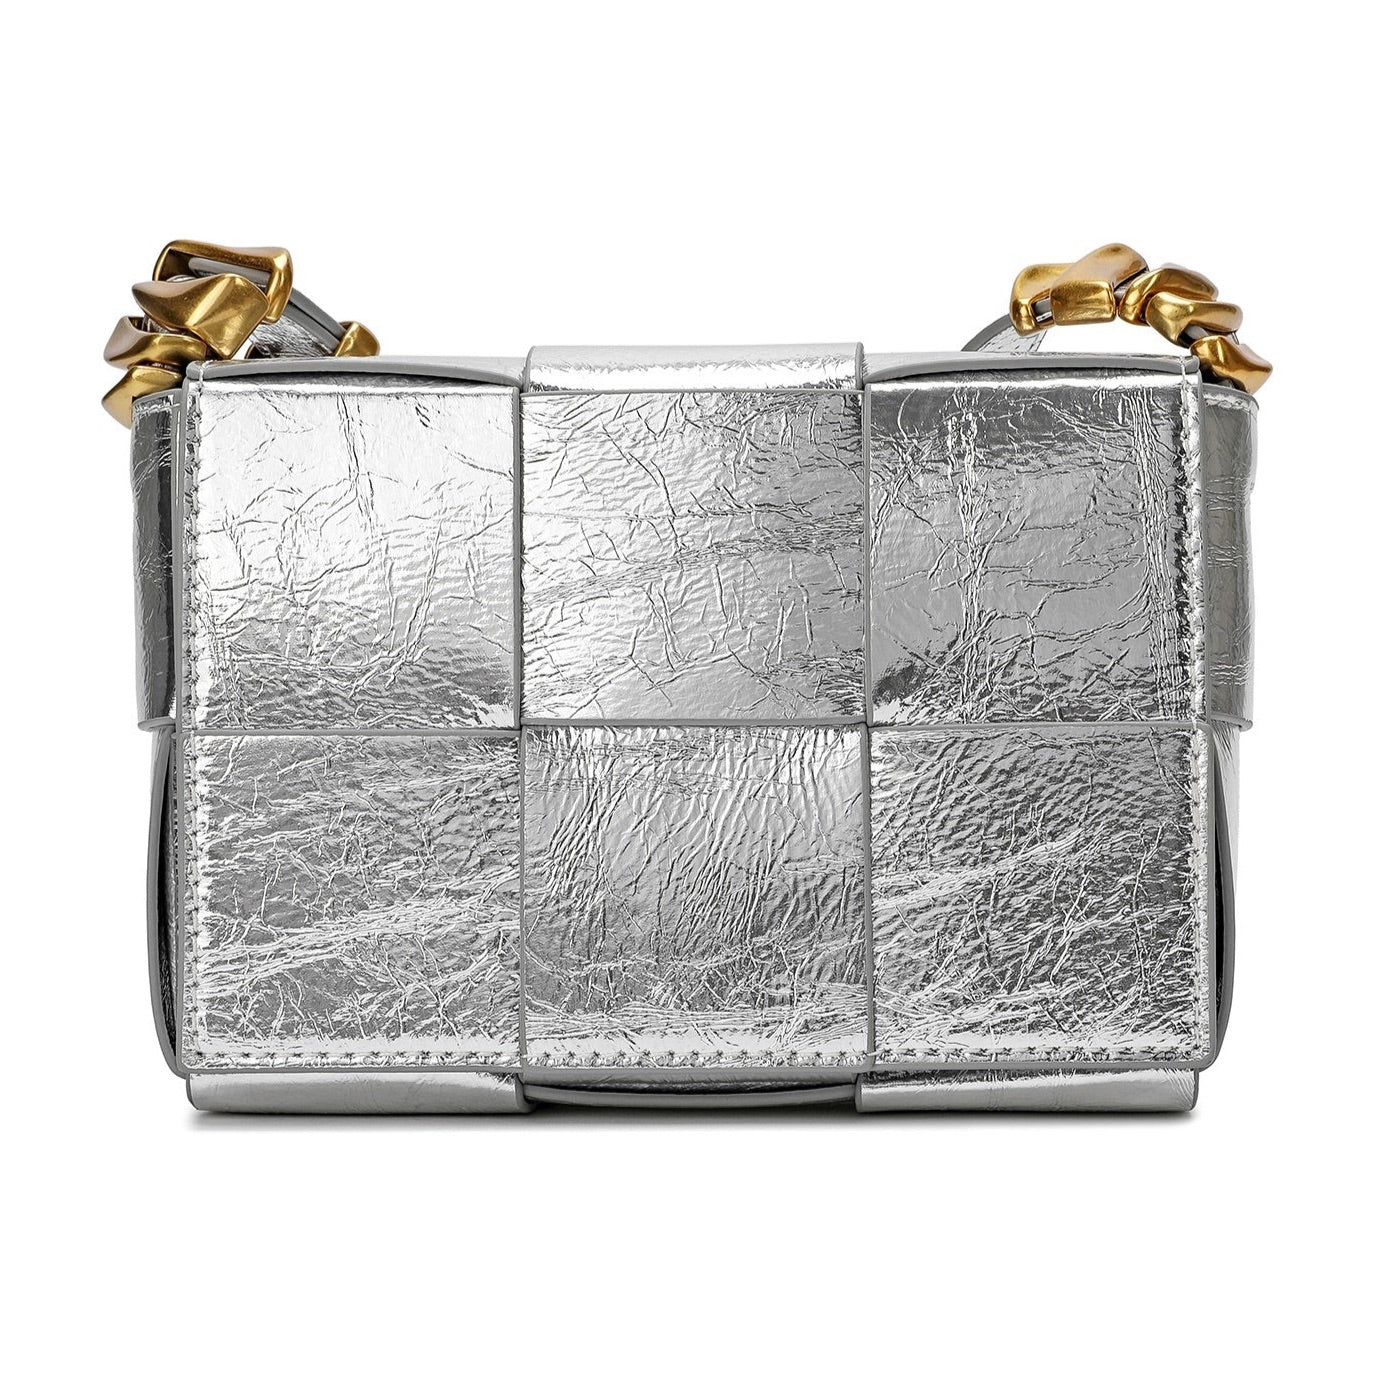 These 18 Metallic Handbags Will Take Any Look to the Stars